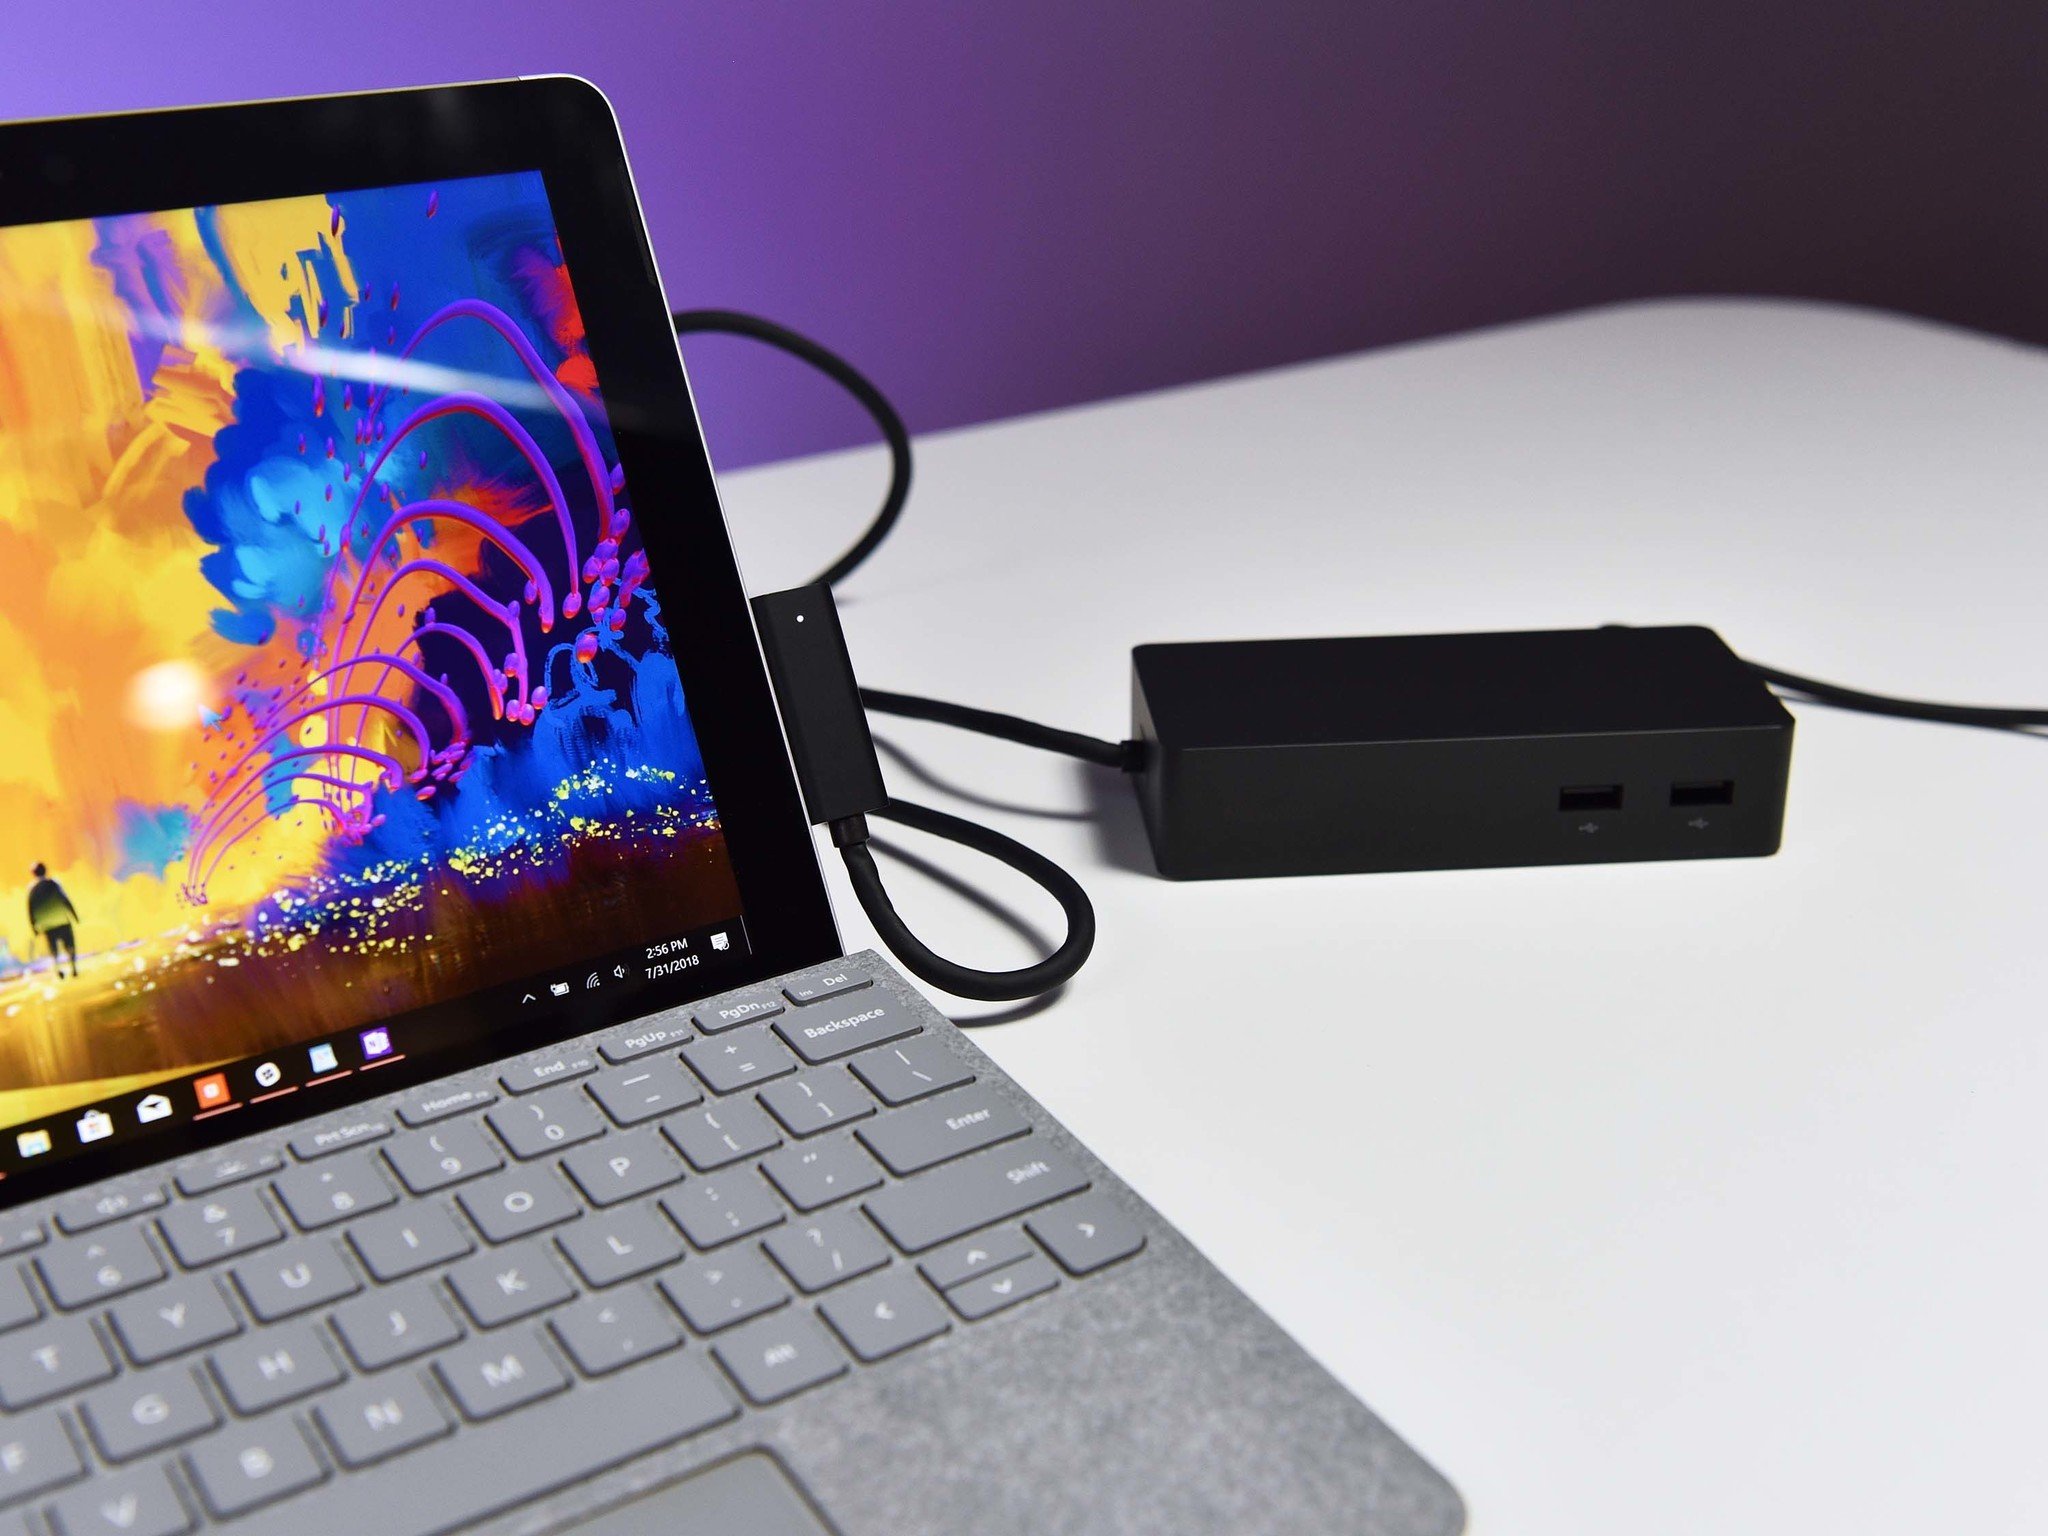 How to update Microsoft Surface Dock firmware | Windows Central